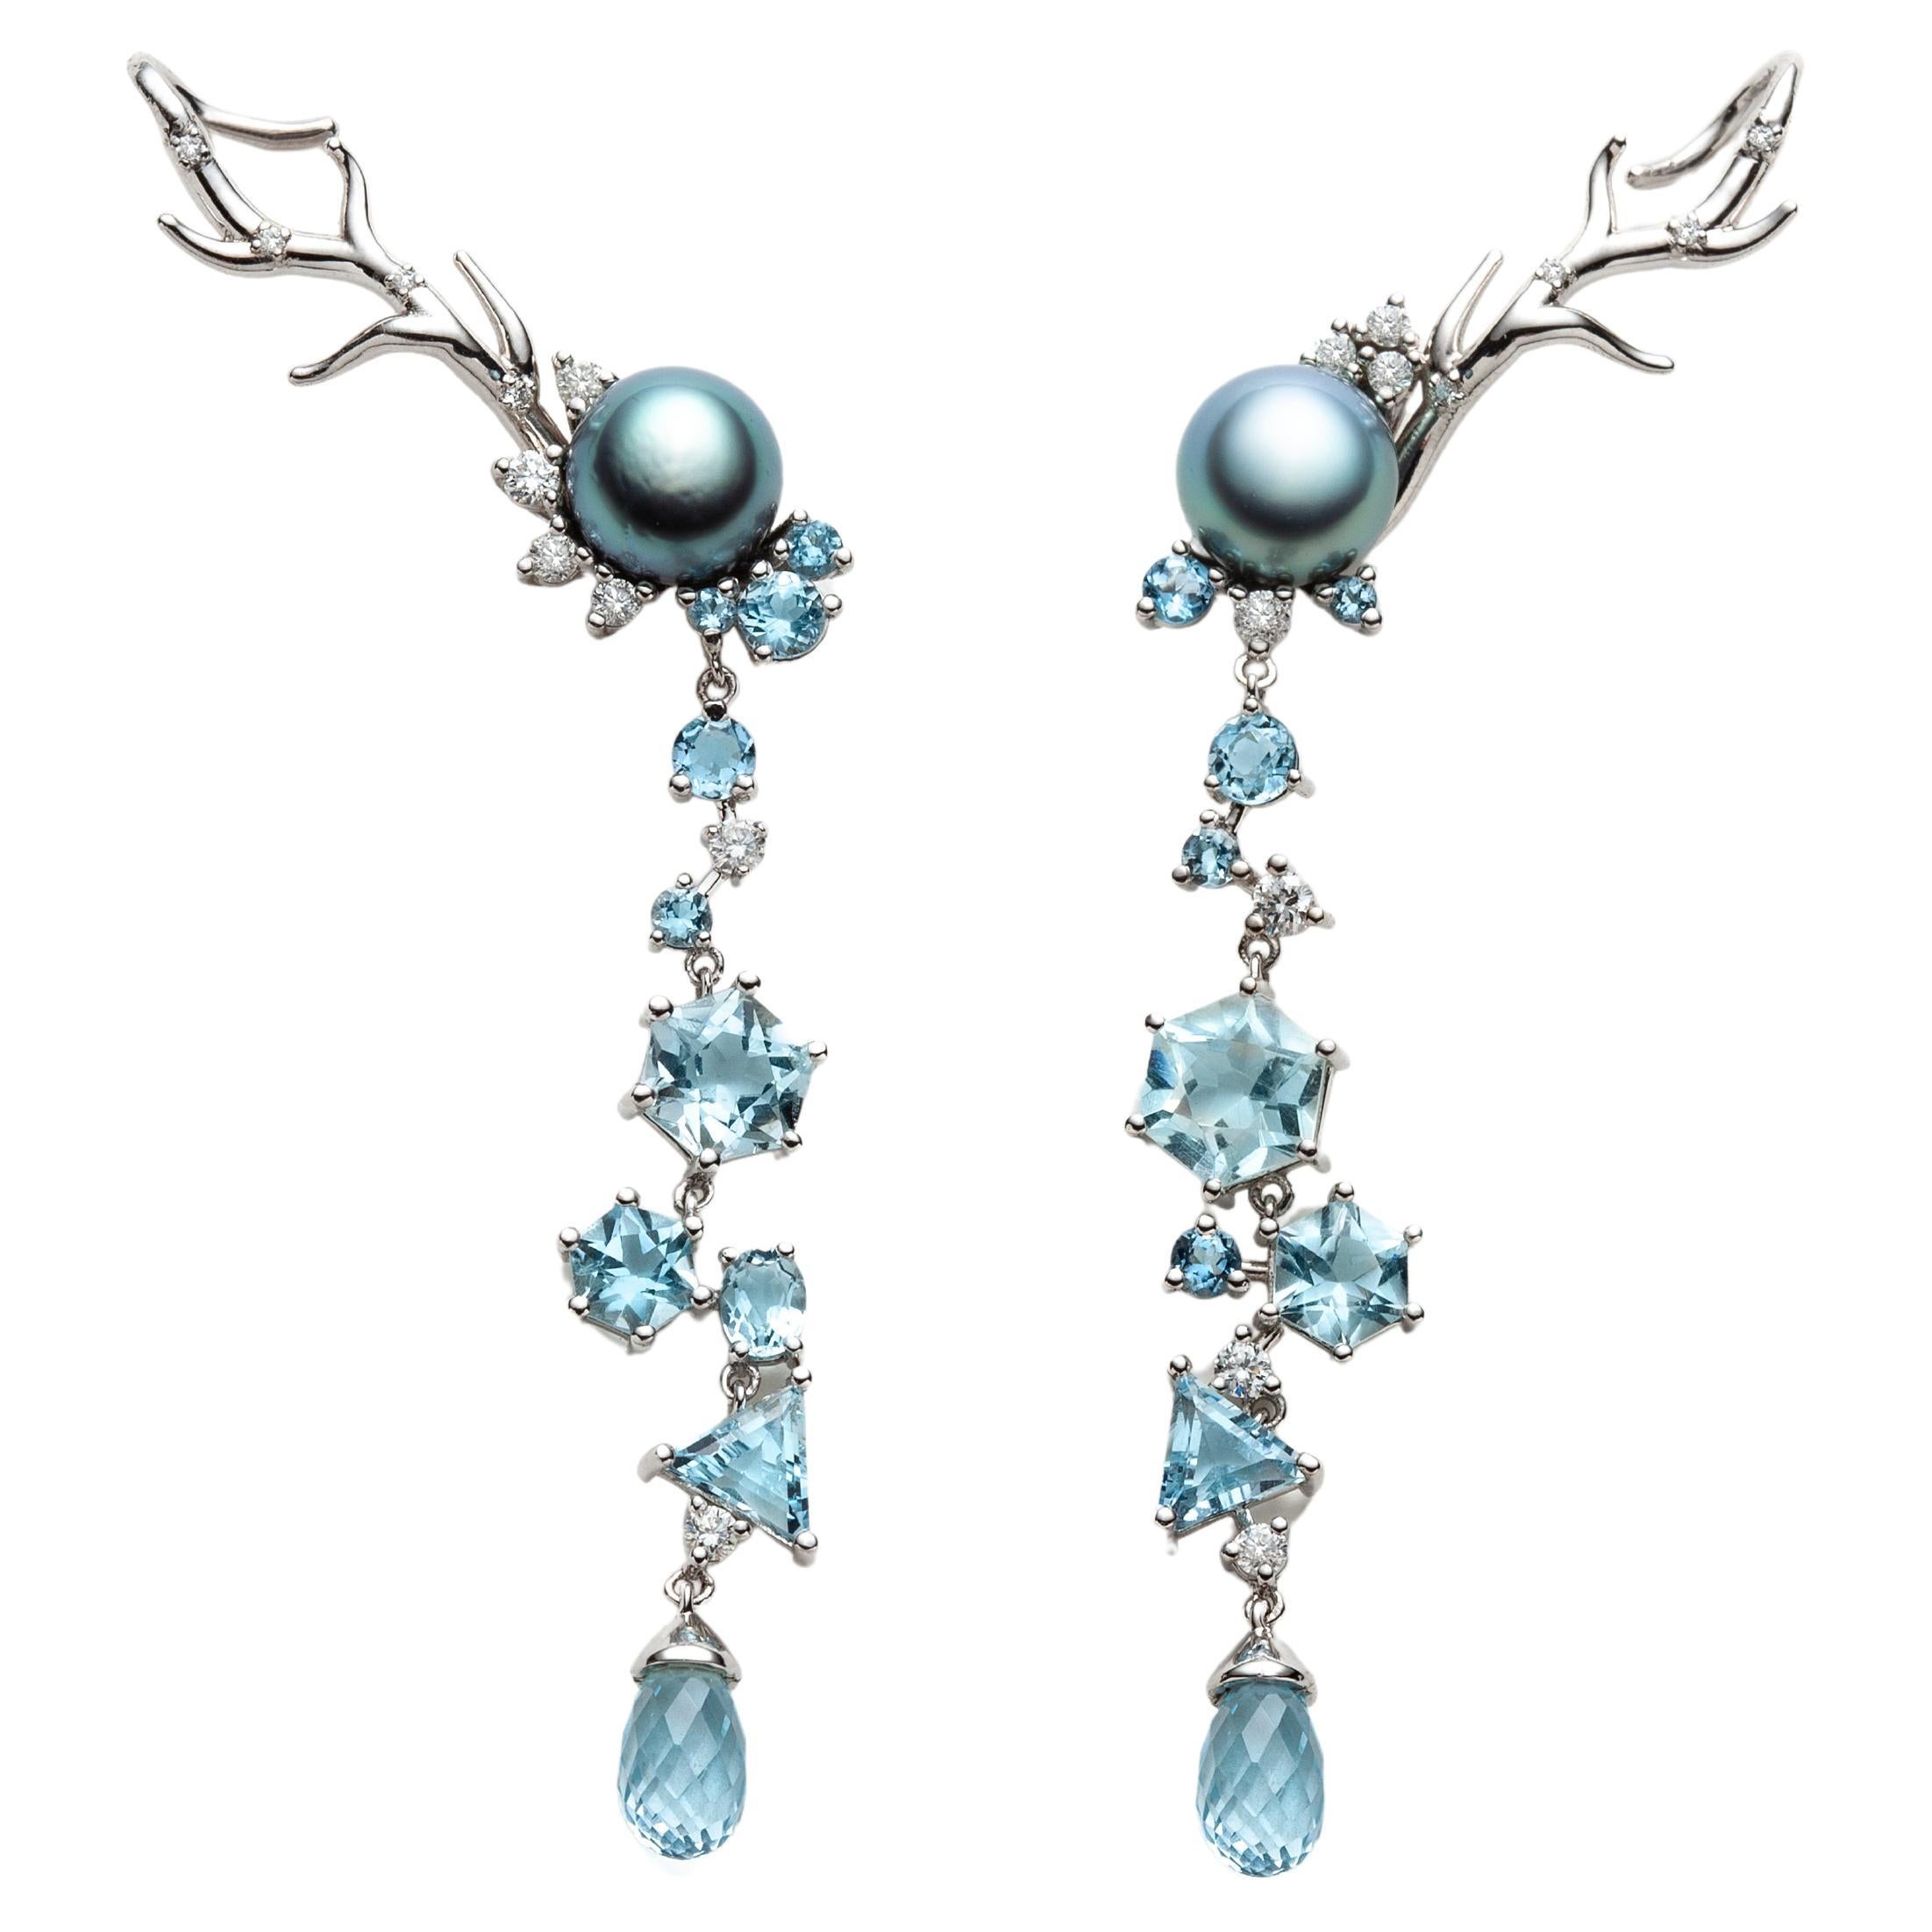 Ciclo Dell’acqua, 18k White Gold Earrings Set with Diamonds, Aquamarines, Pearls For Sale